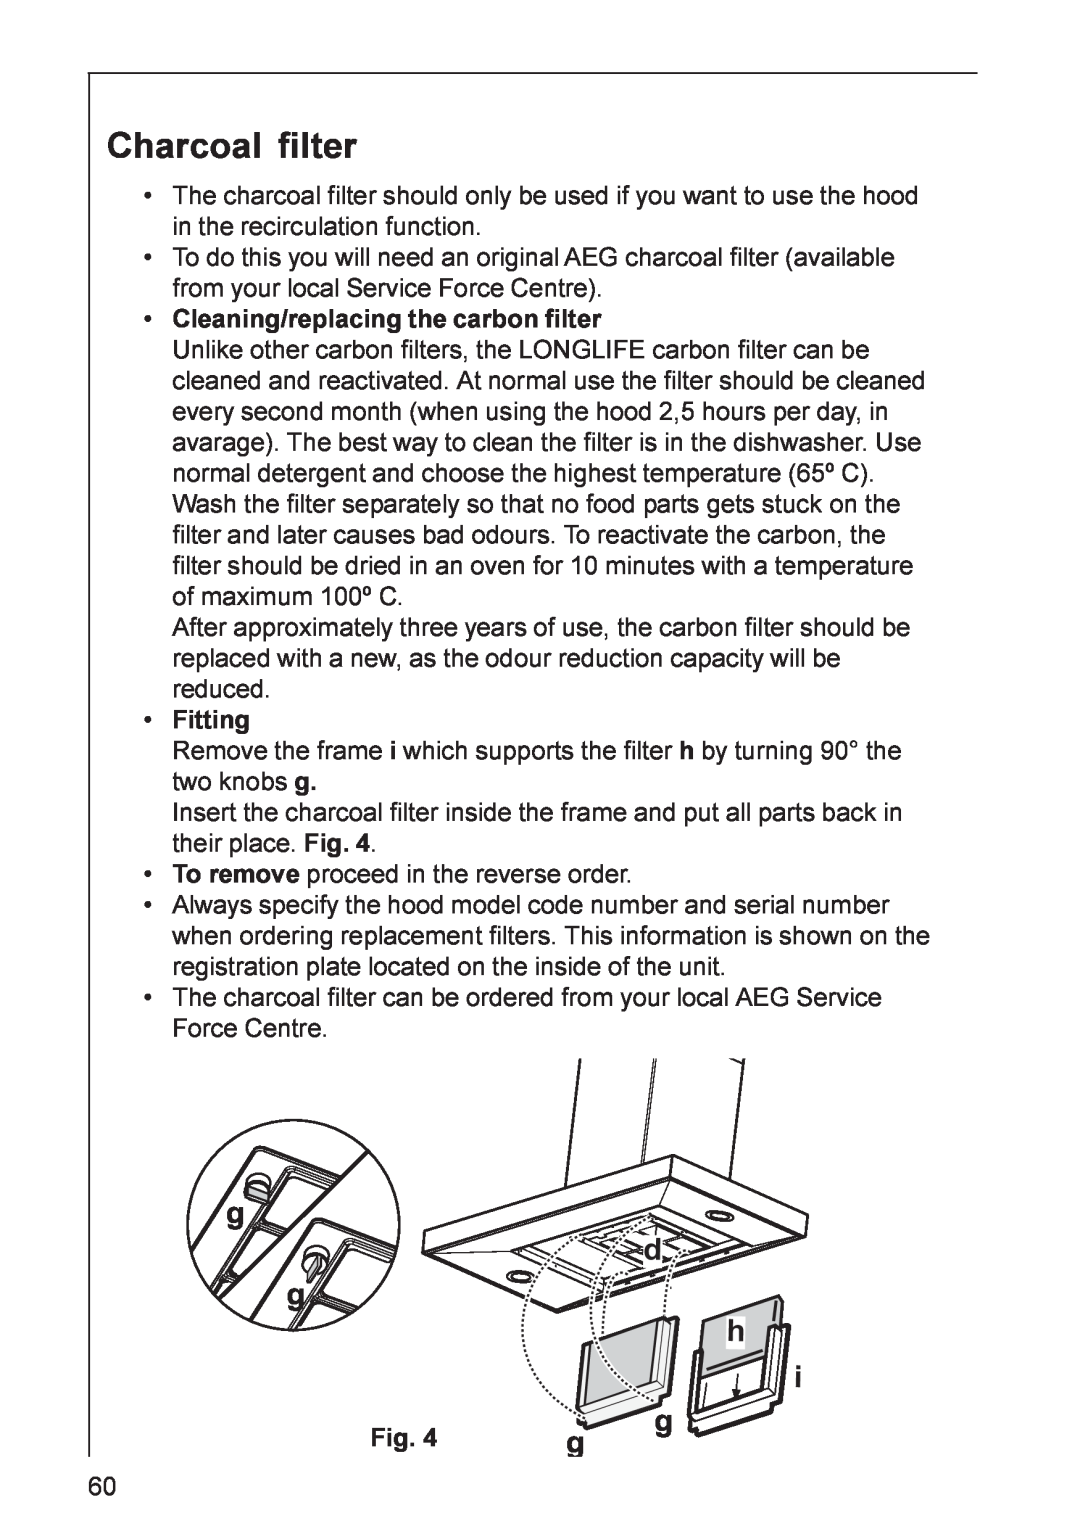 Electrolux HD 8890, HD 8820, DD 8820 installation instructions Charcoal filter, d h g g 